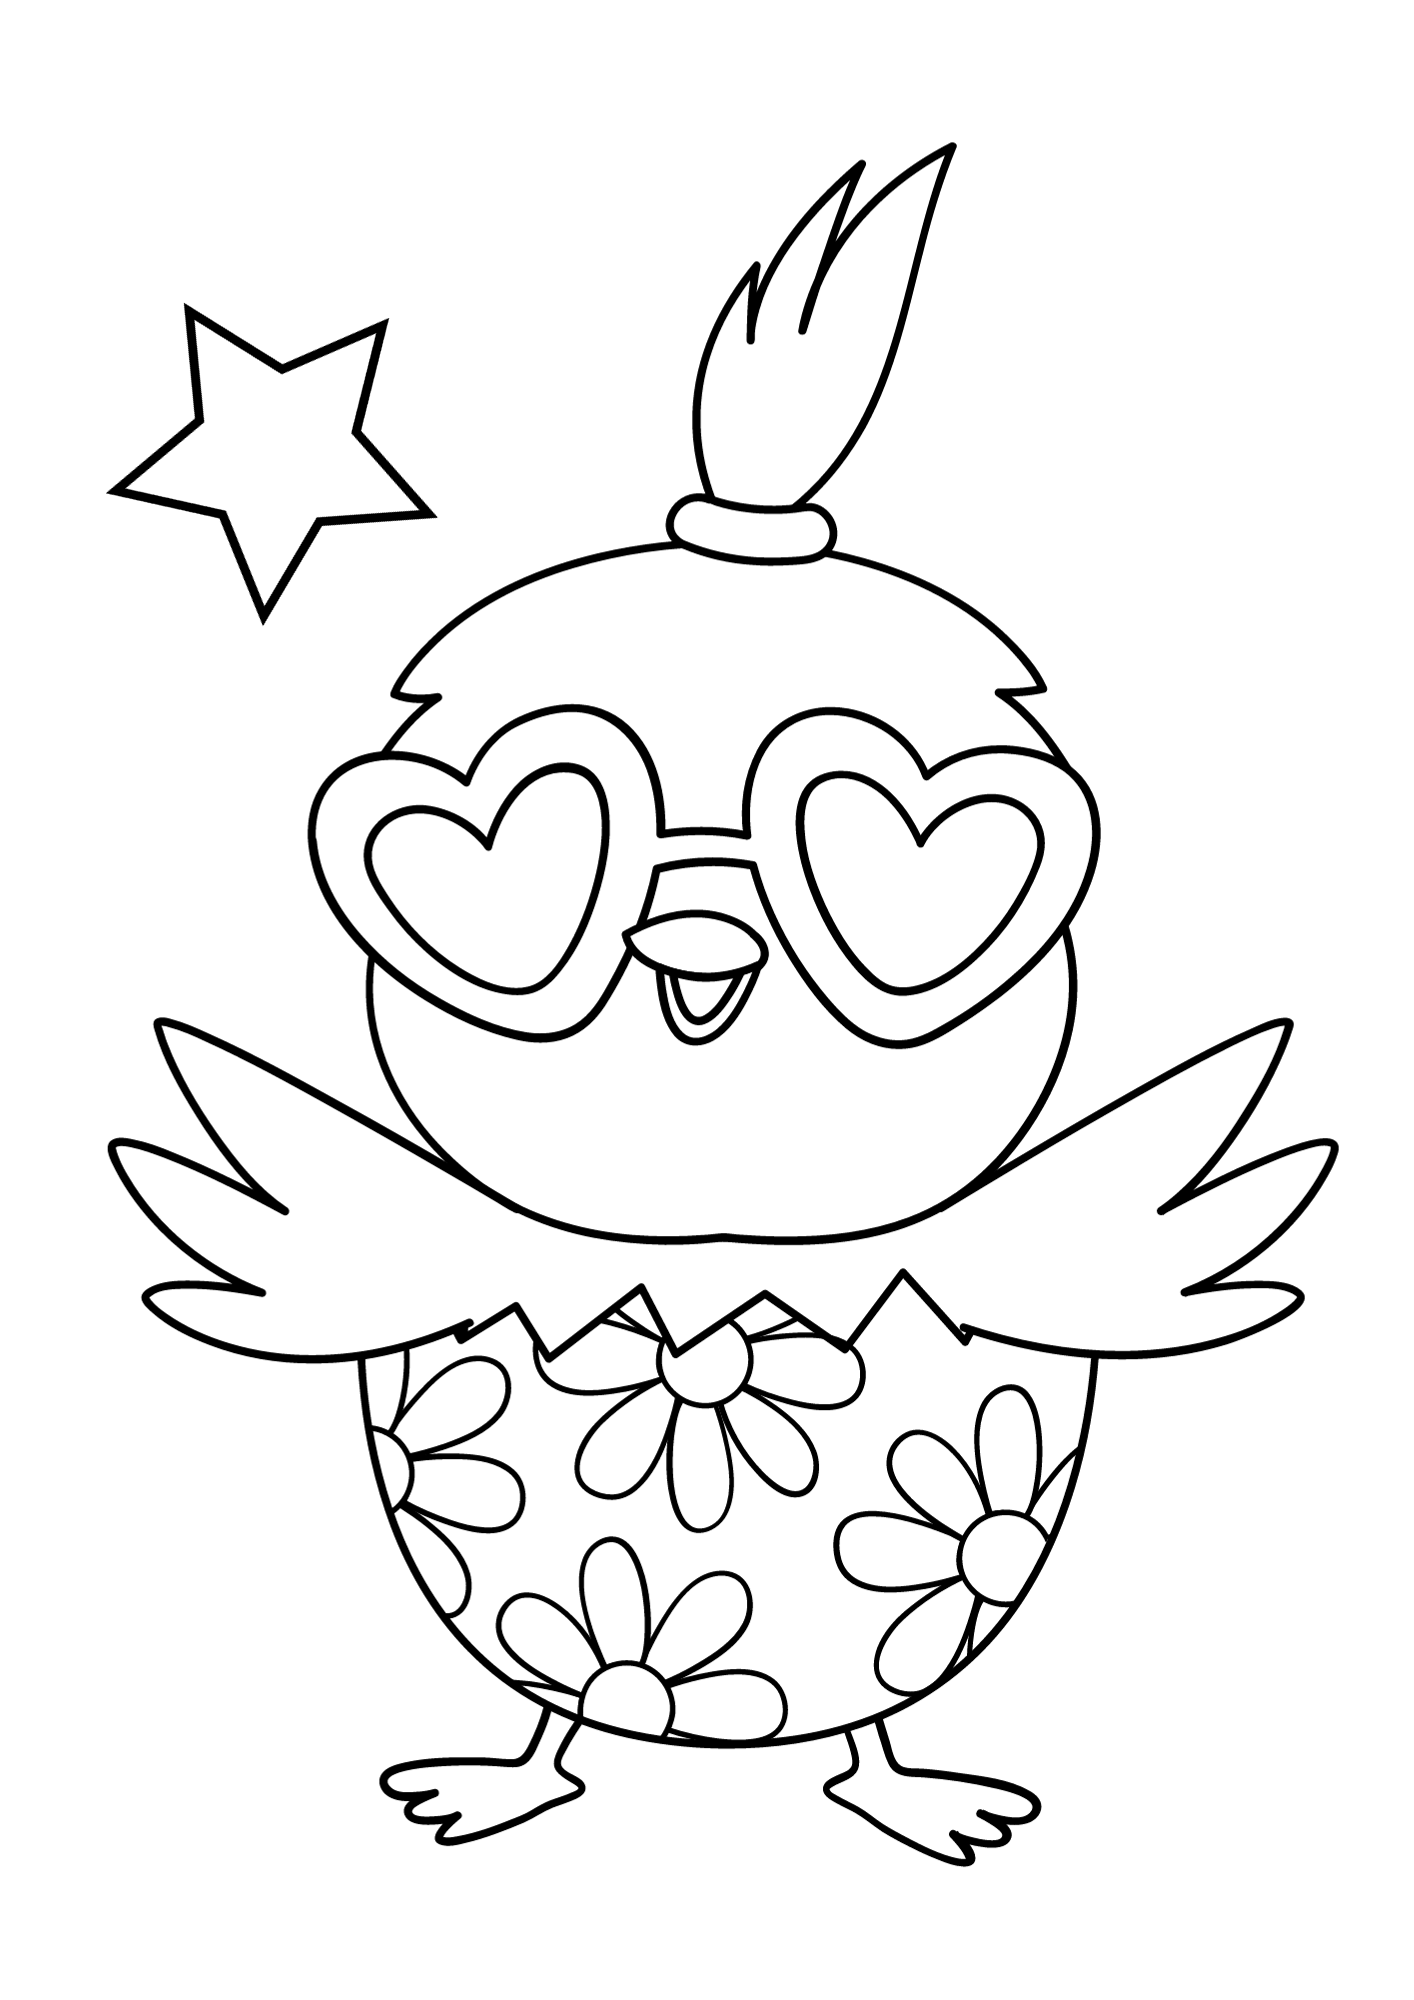 Cute Easter Chick Coloring Pages